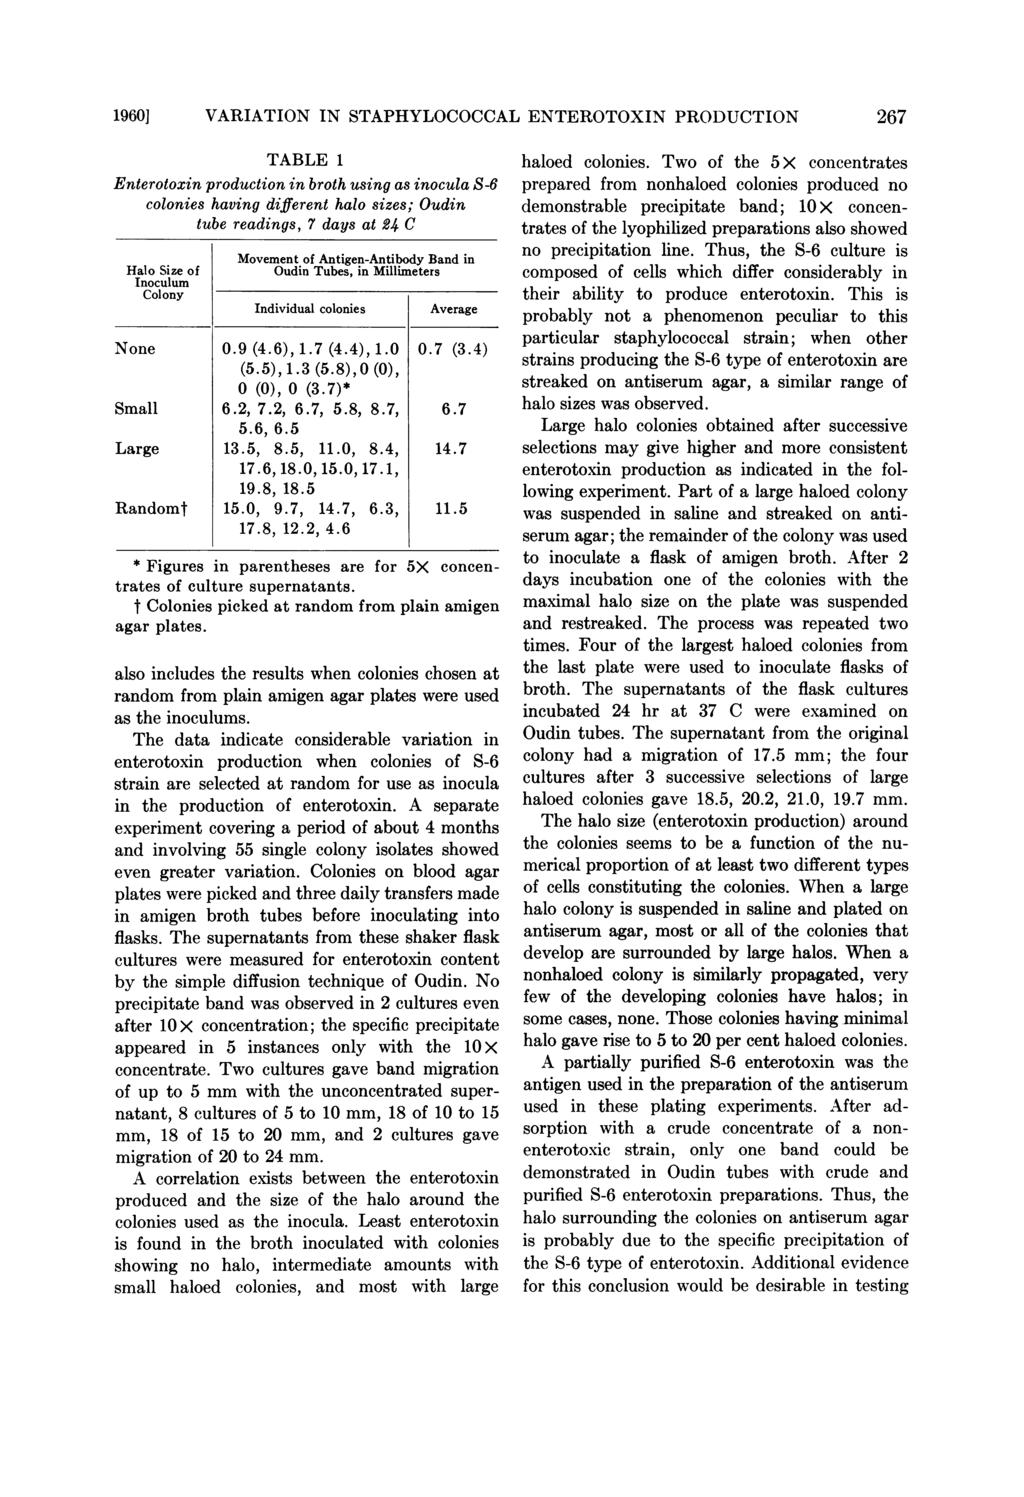 1960] VARIATION IN STAPHYLOCOCCAL ENTEROTOXIN PRODUCTION 267 TABLE 1 Enterotoxin production in broth using as inocula S-6 colonies having different halo sizes; Oudin tube readings, 7 days at 24 C